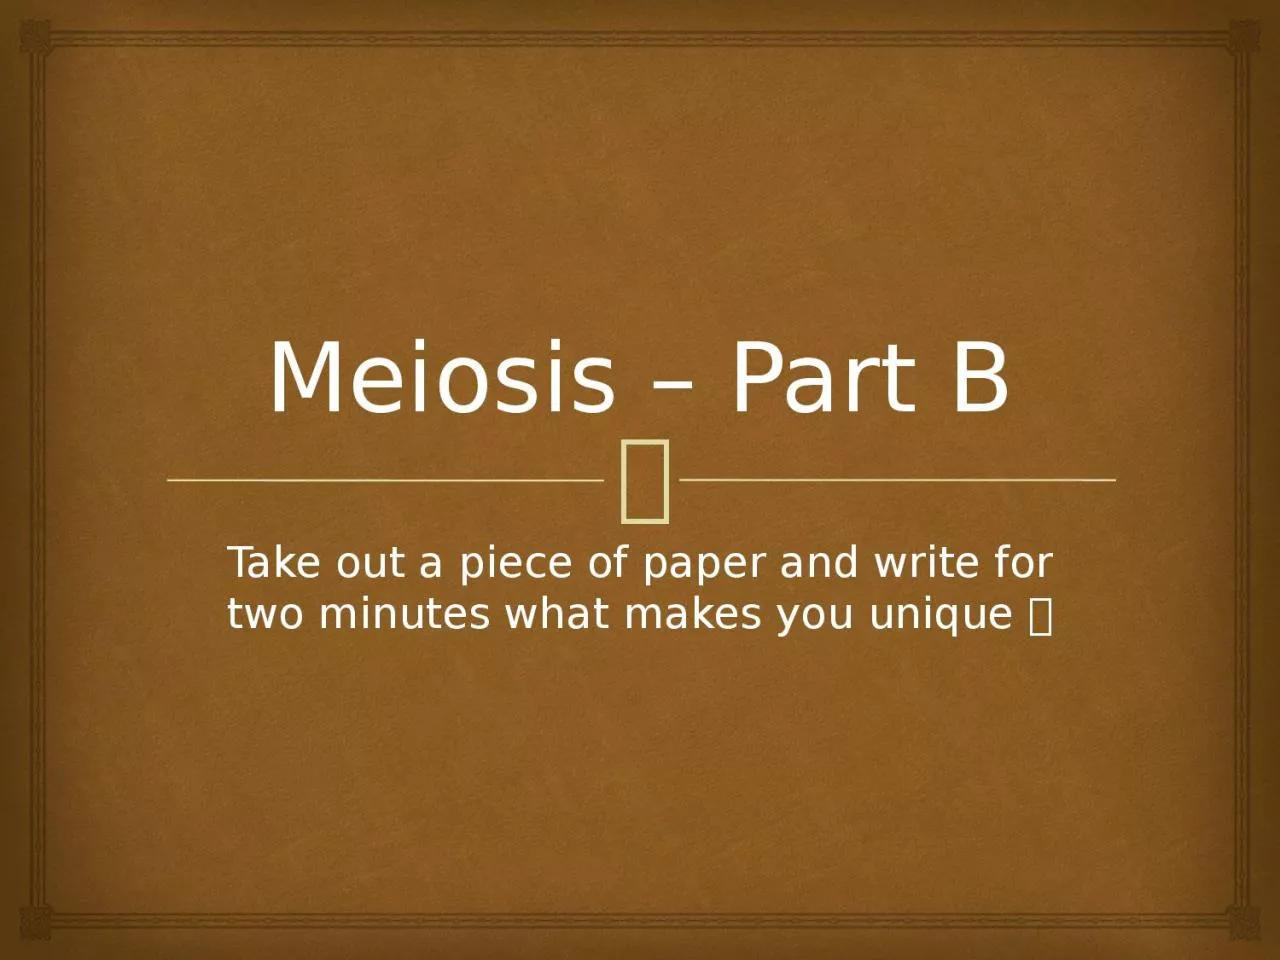 Meiosis – Part B Take out a piece of paper and write for two minutes what makes you